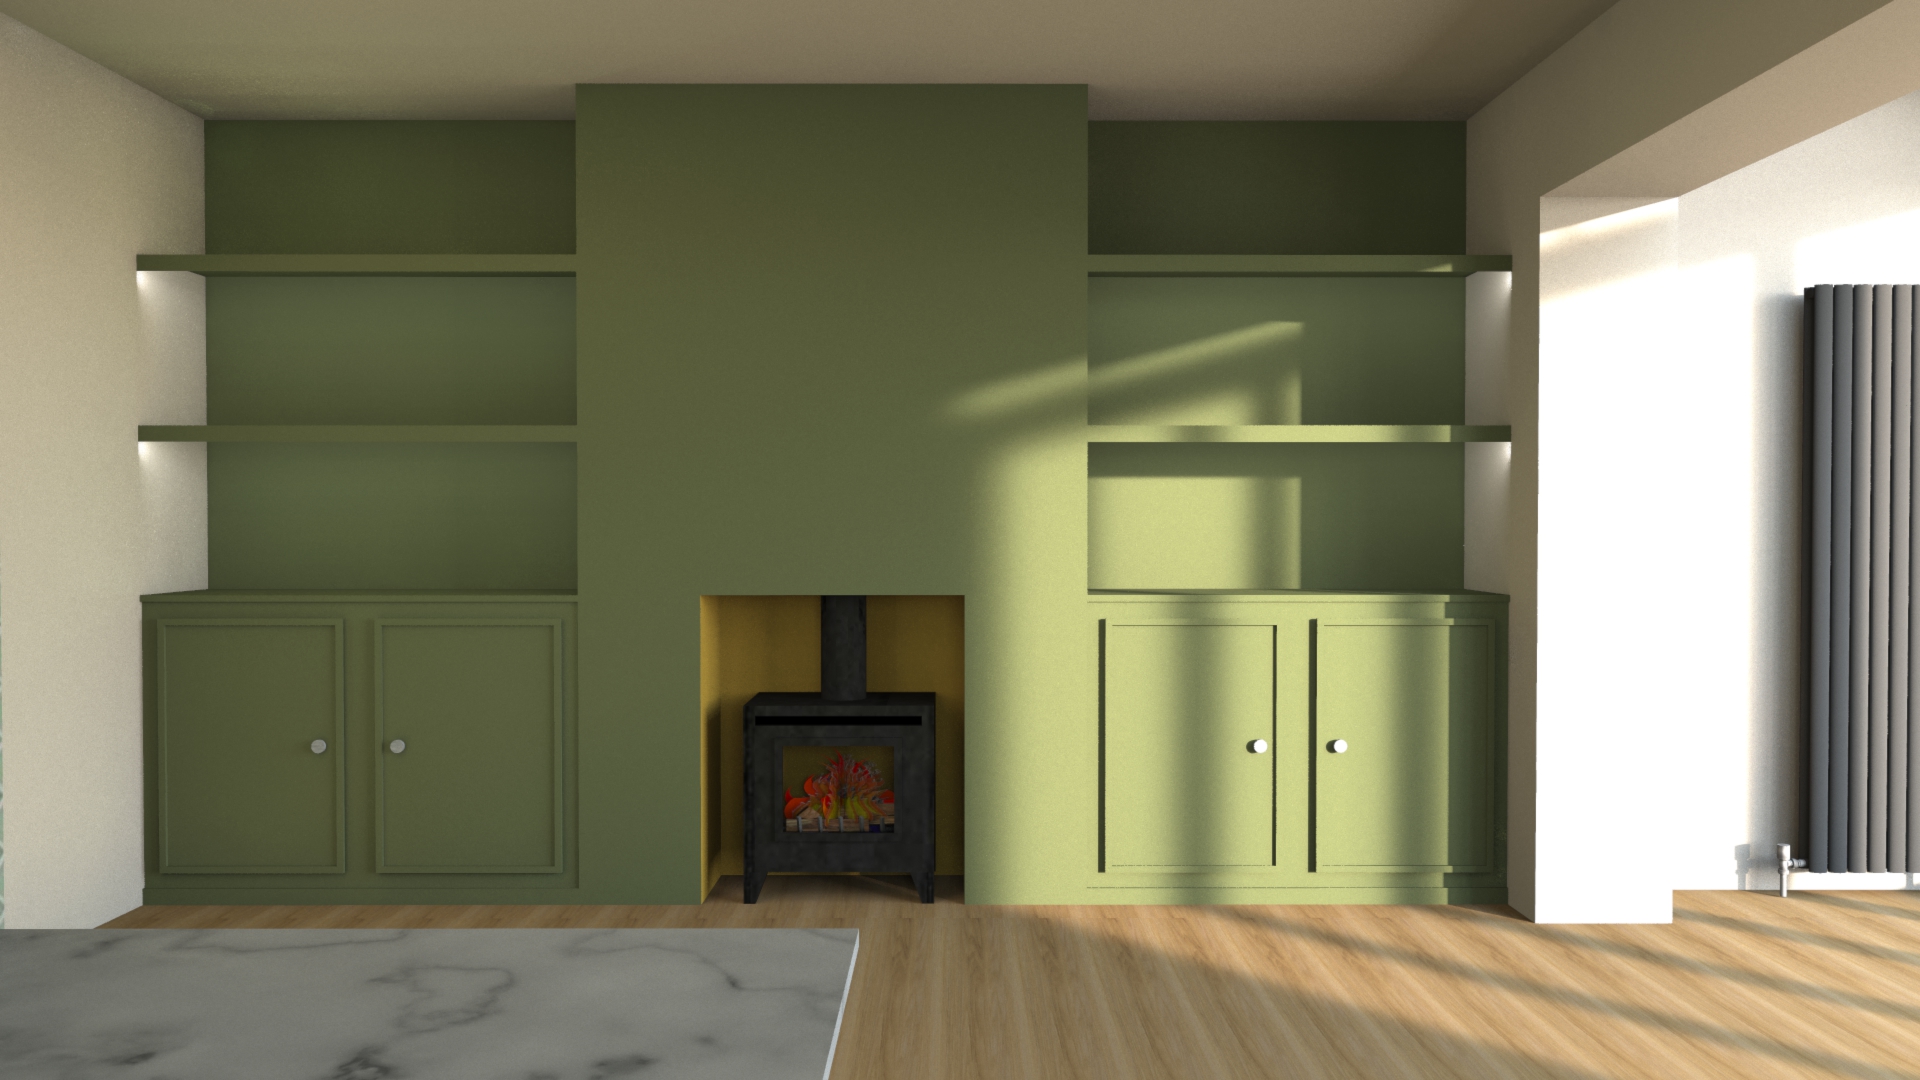 A rendered Sketch Up model of the room with the proposed built in shelves.